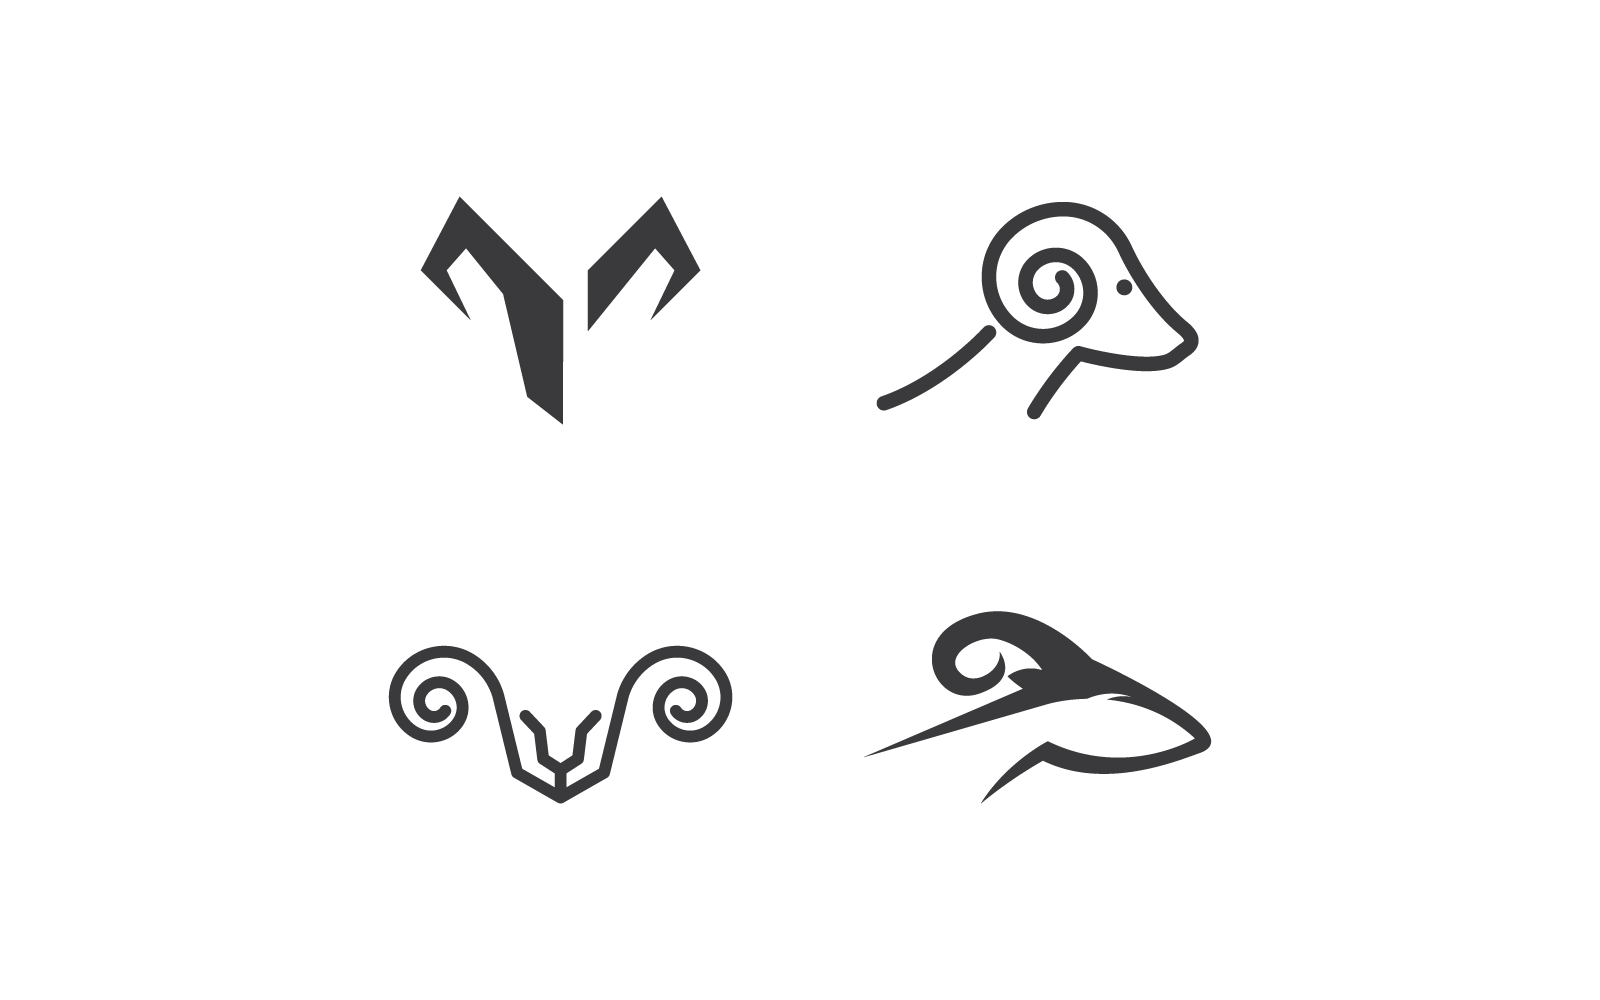 Goat and sheep logo template vector illustration